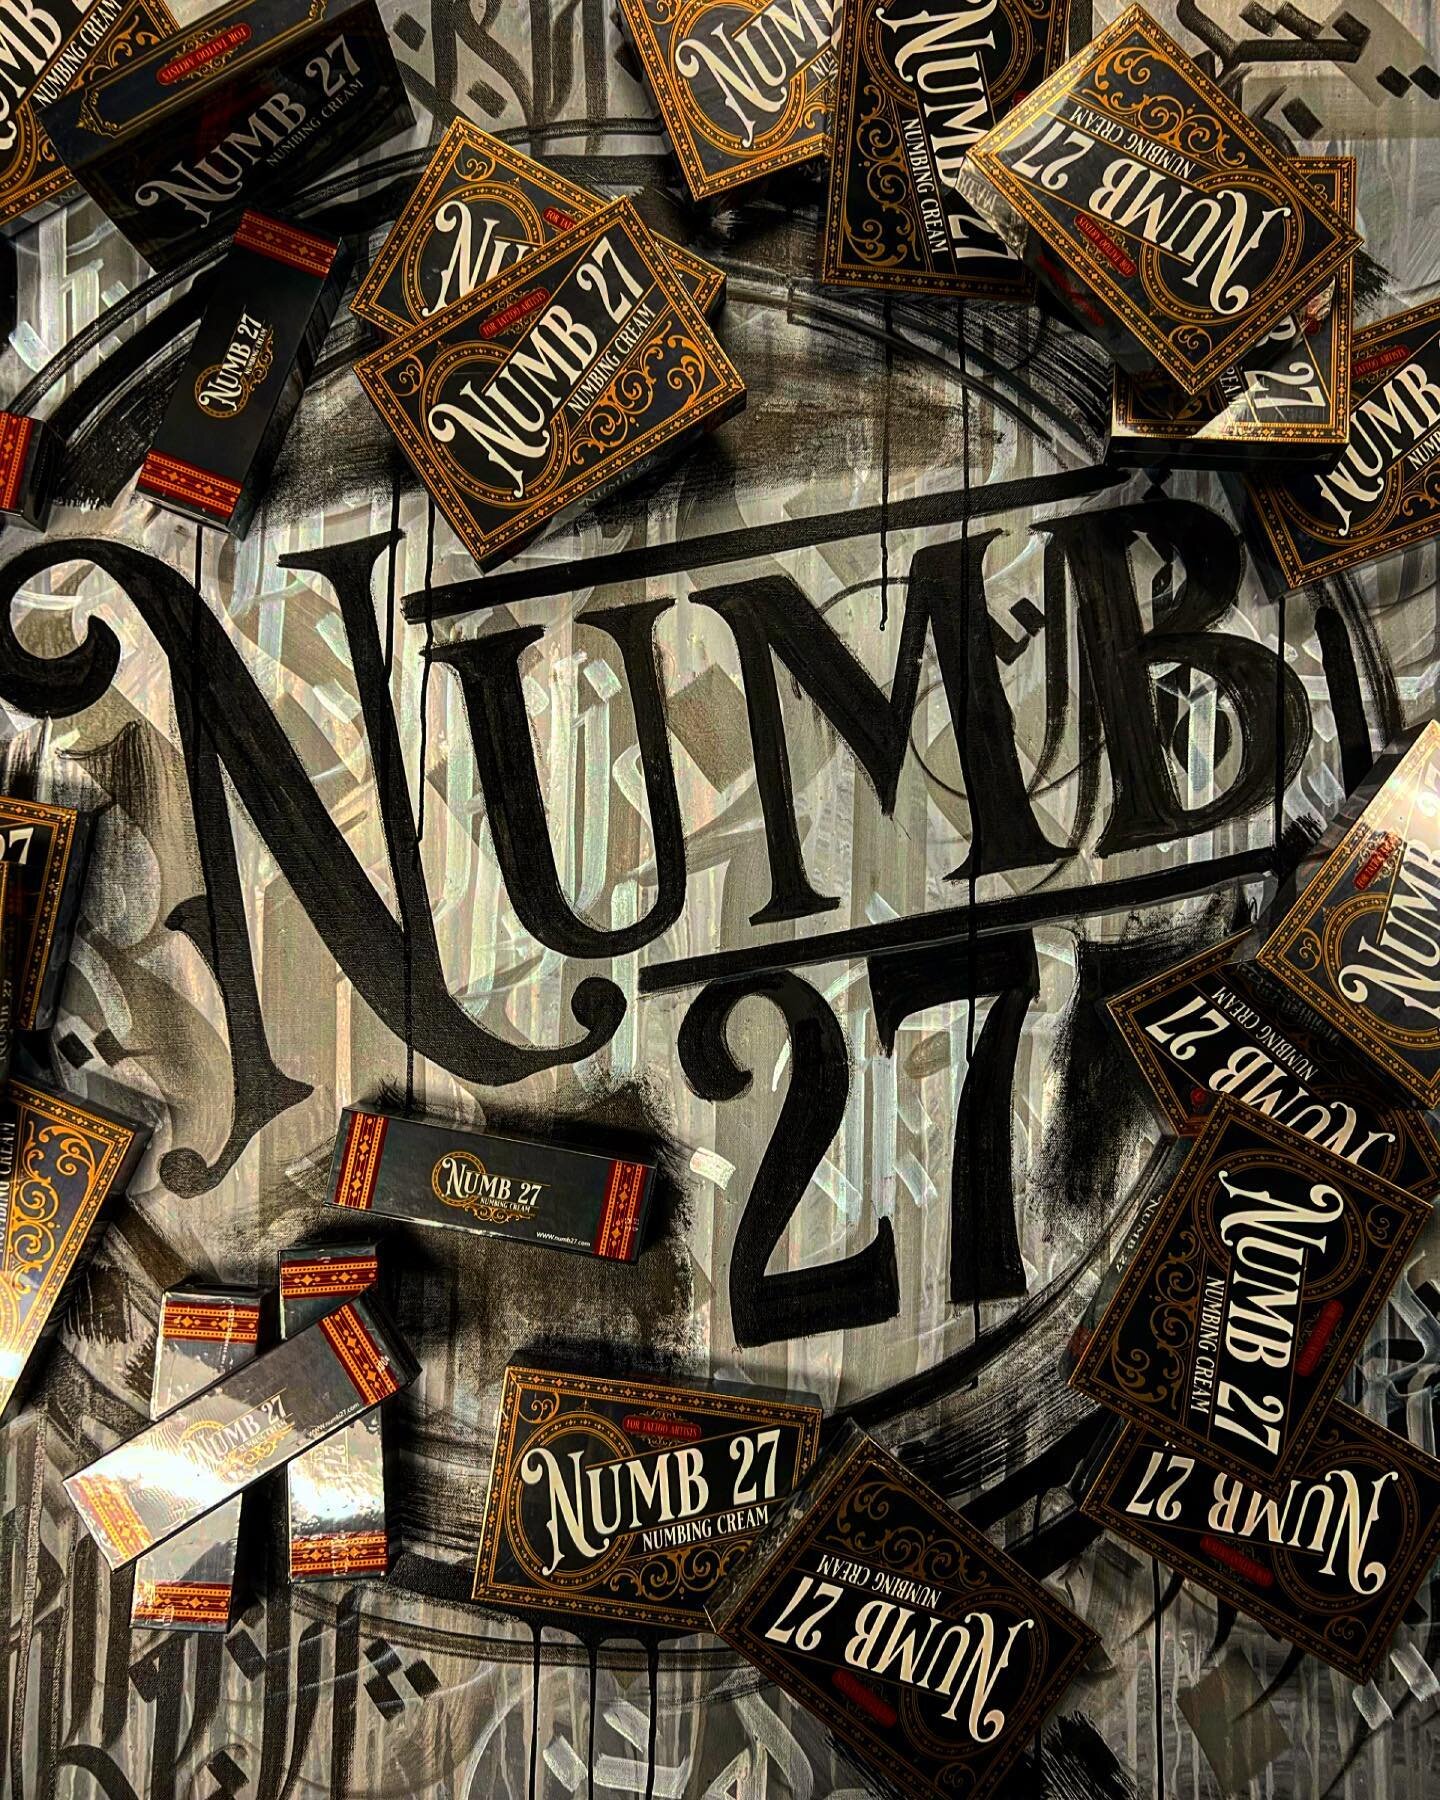 Best Tattooer Made Product that&rsquo;s out Now !!!! Check out Numb27.com and try some for yourself !!!!

#tattoo #tattoonumbingcream #numb27 #tattoosupply #tattooartist #tattooproduct #tattooproducts